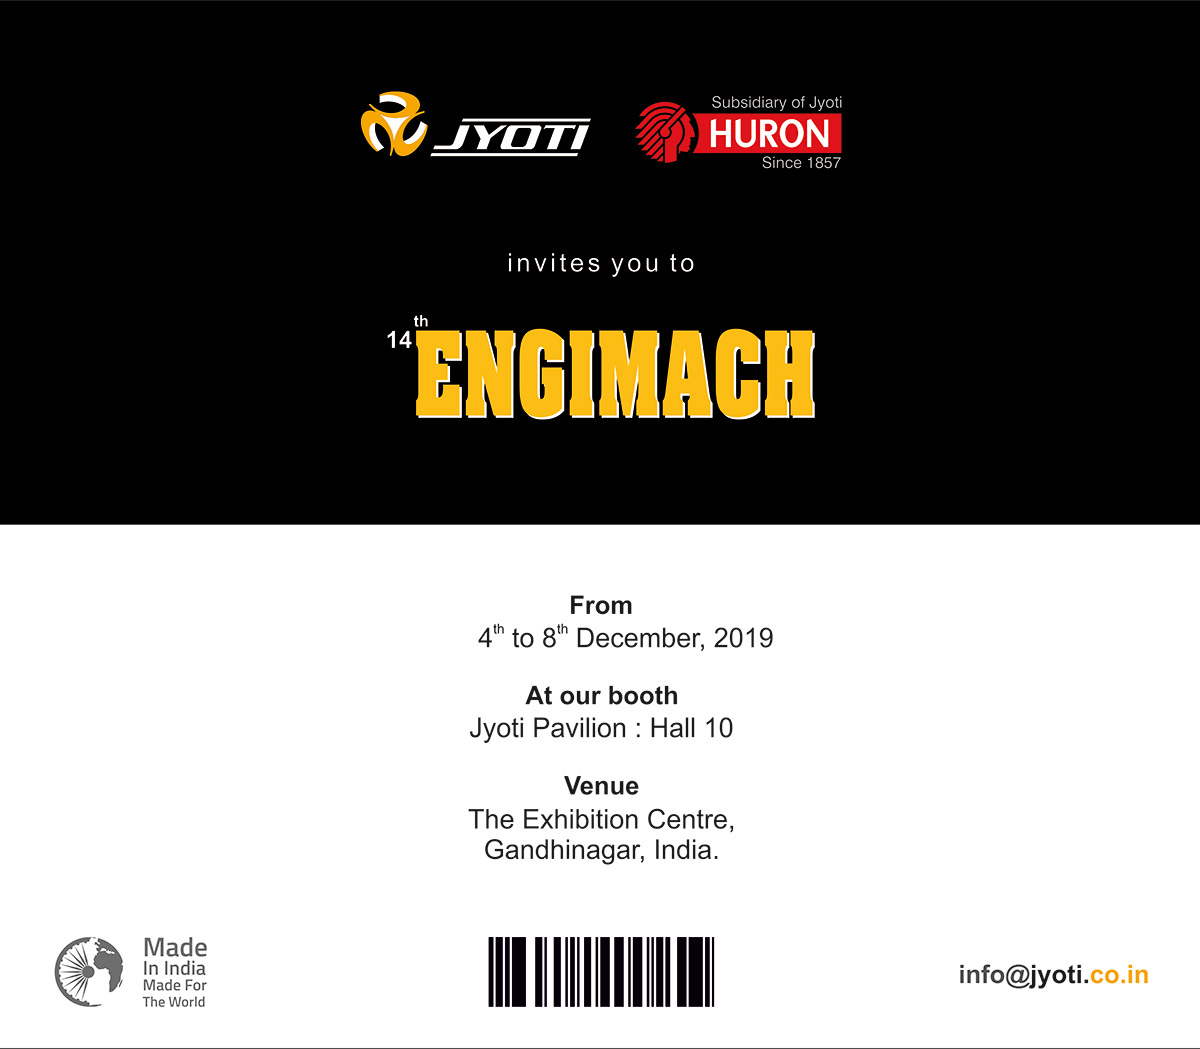 Jyoti cordially invites all our valued customers at Jyoti Pavilion at  Gujarat’s largest industrial show, ENGIMACH’ 2019